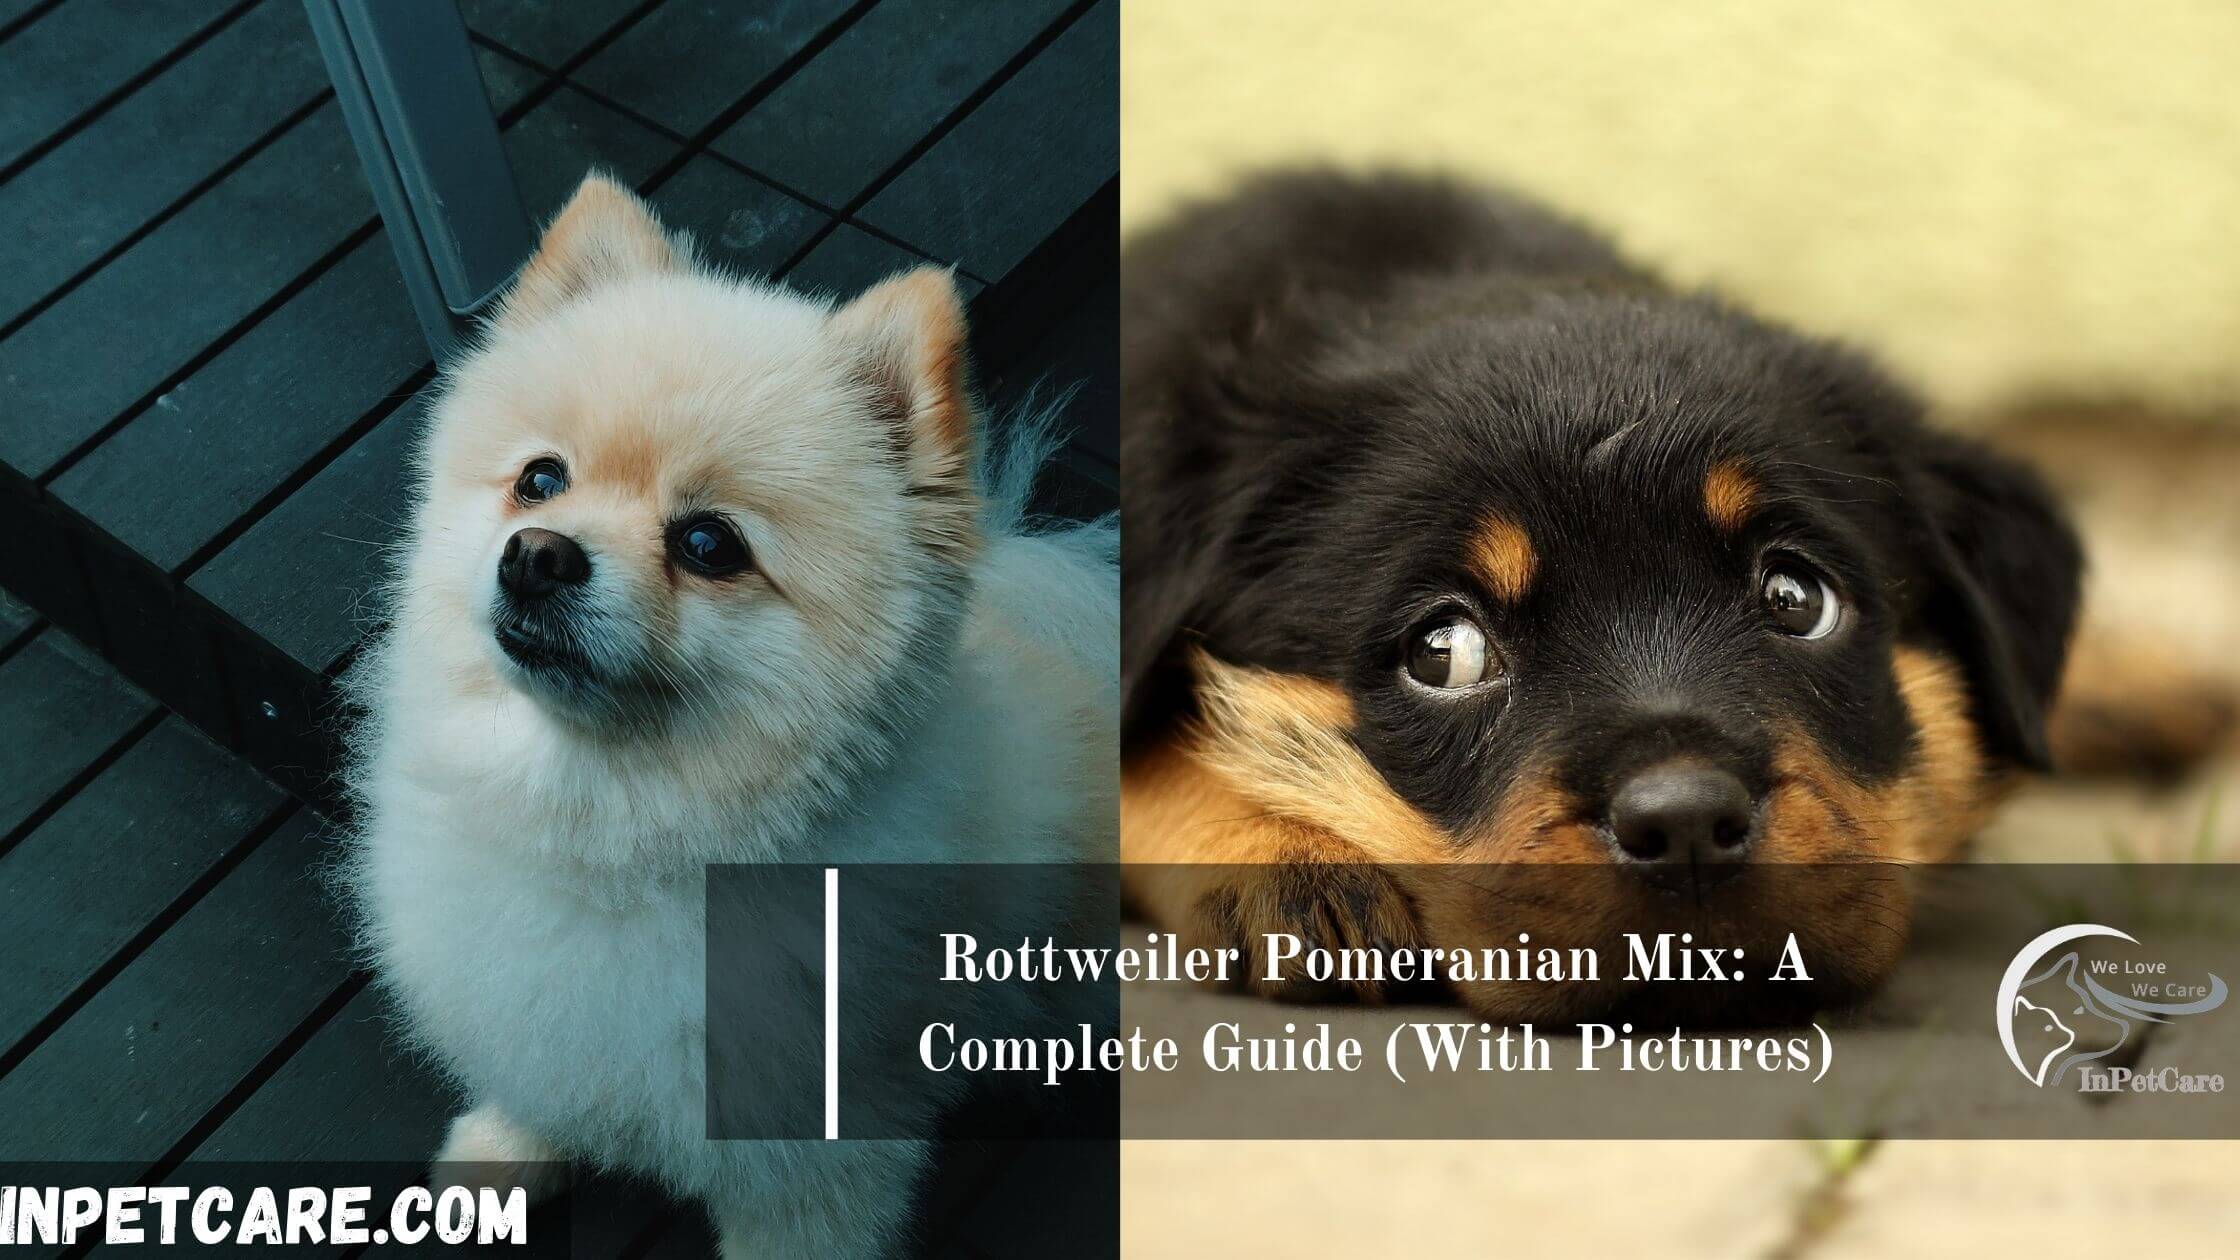 Hummingbird at klemme Afstå Rottweiler Pomeranian Mix: A Complete Guide (With Pictures)